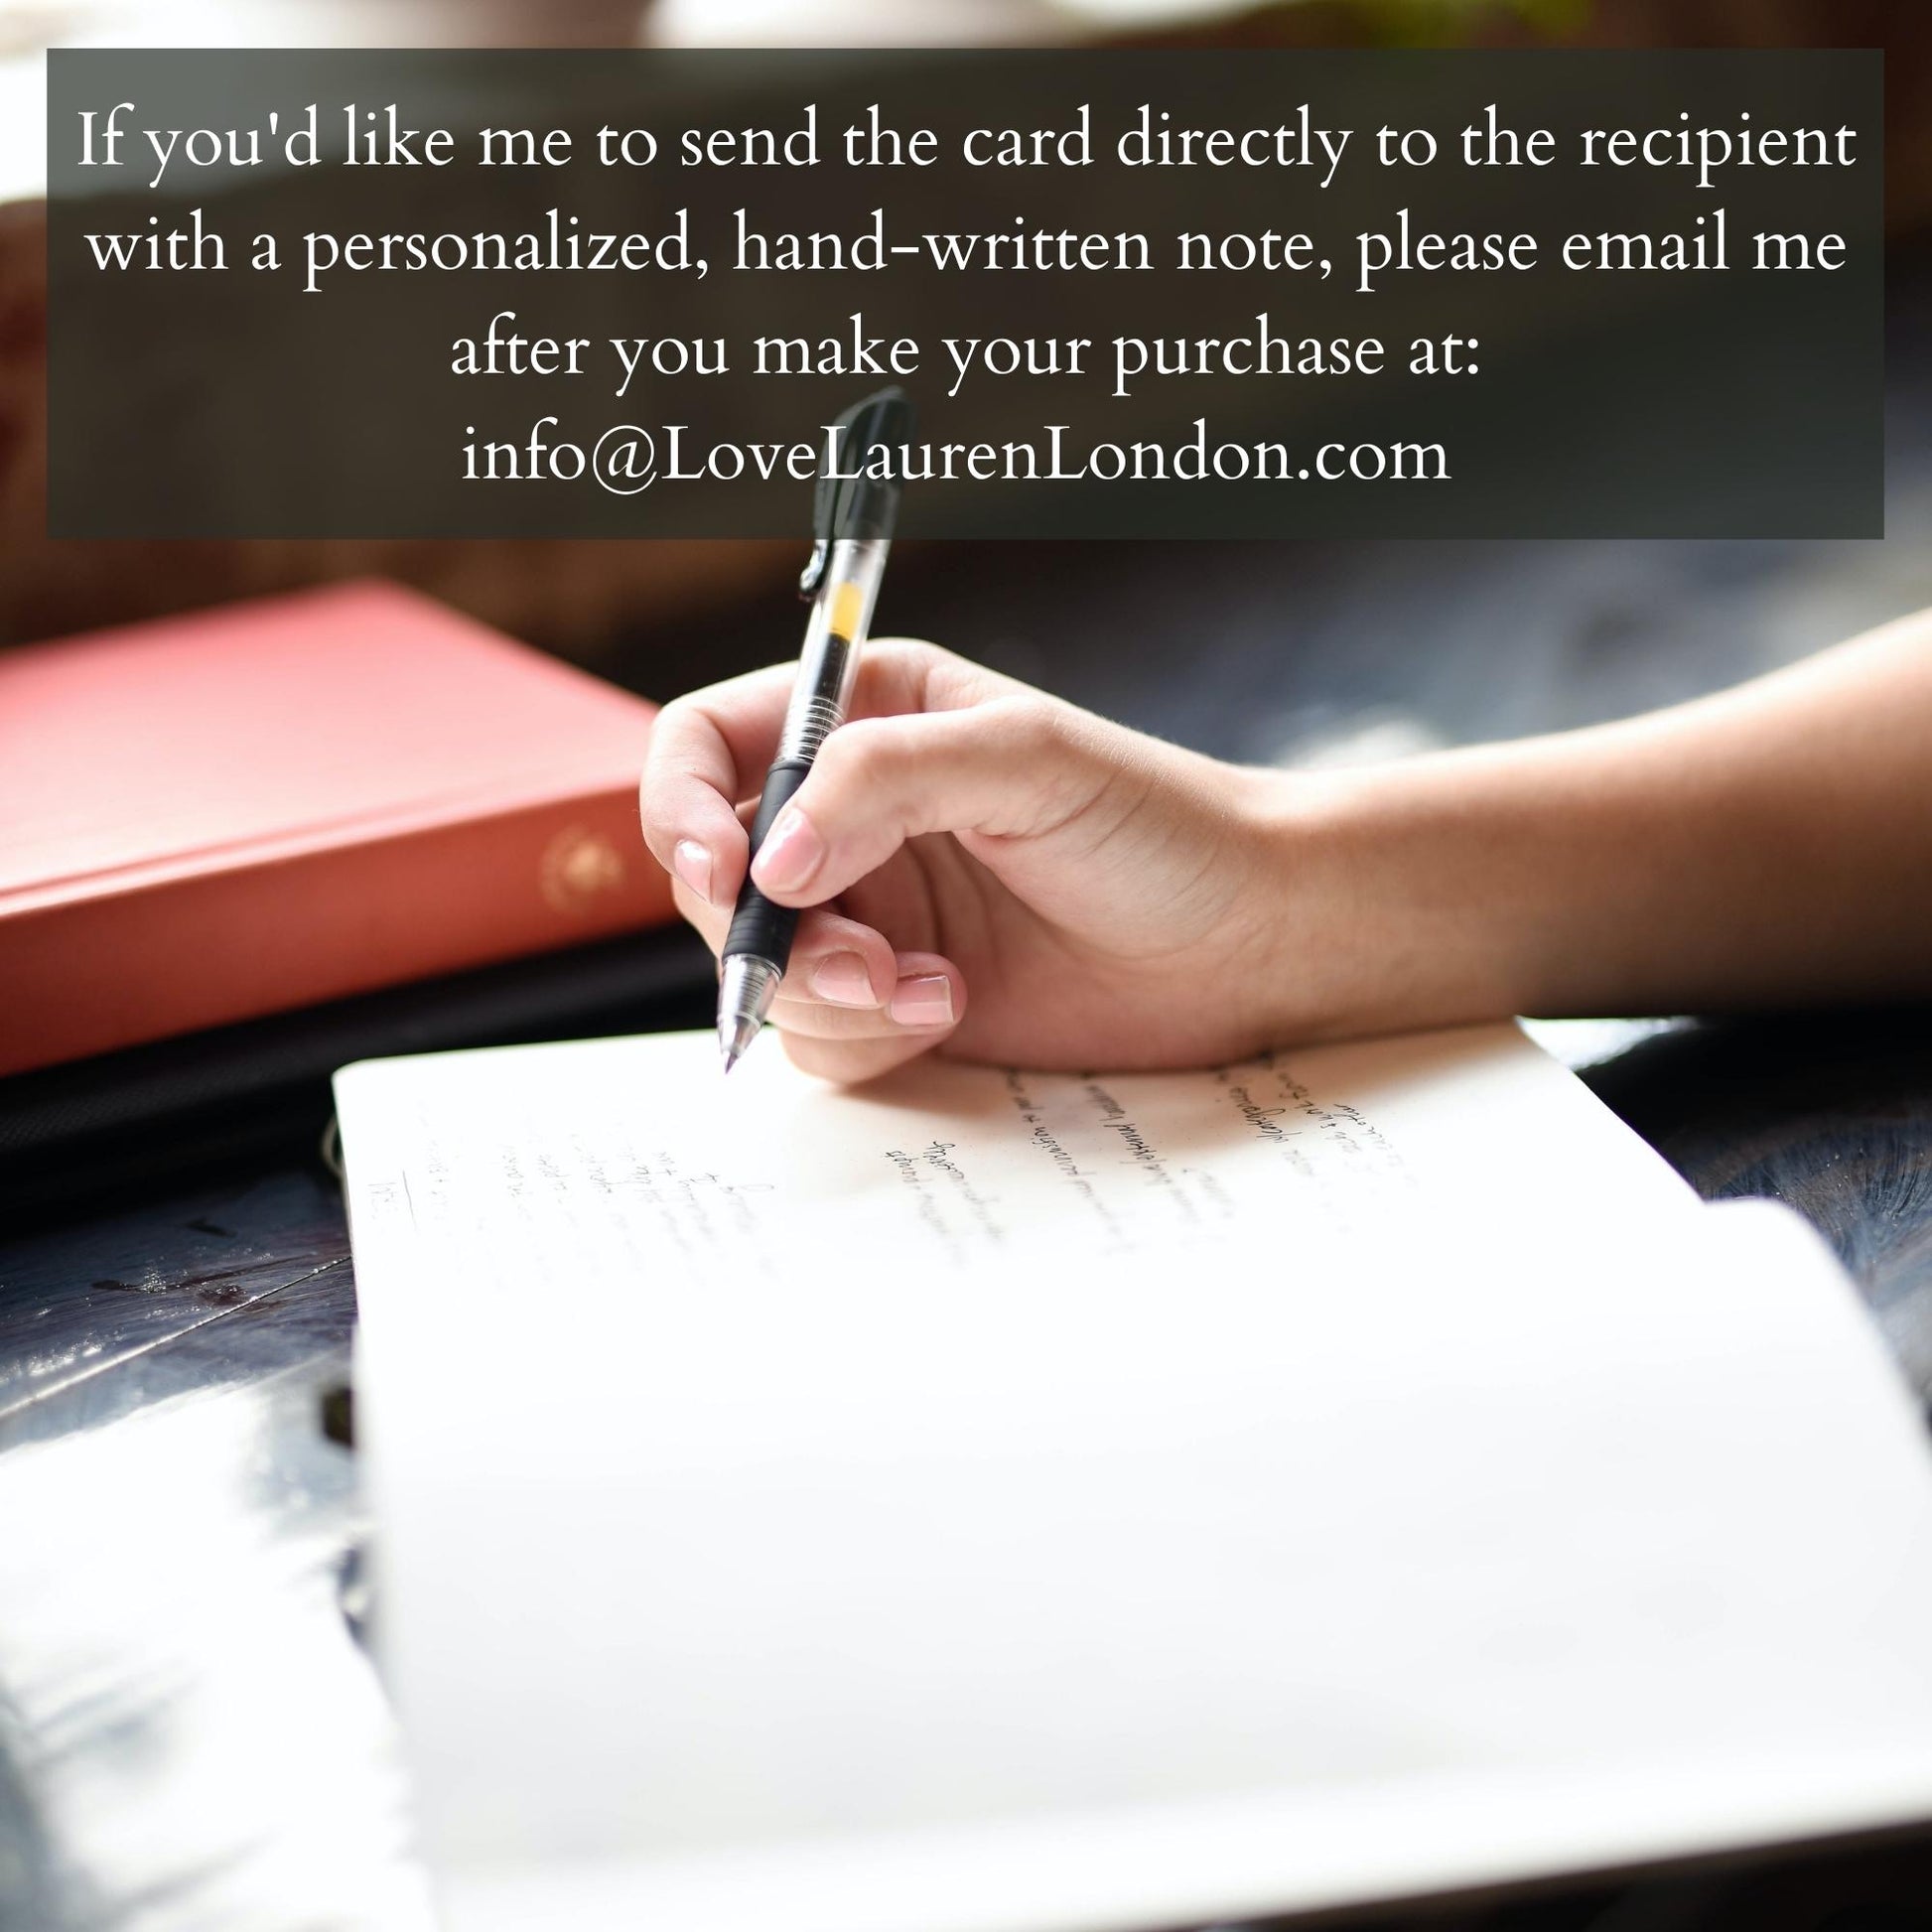 i can hand-write a note for you and mail it right to the recipient - for no additional fee. please email me after your purchase